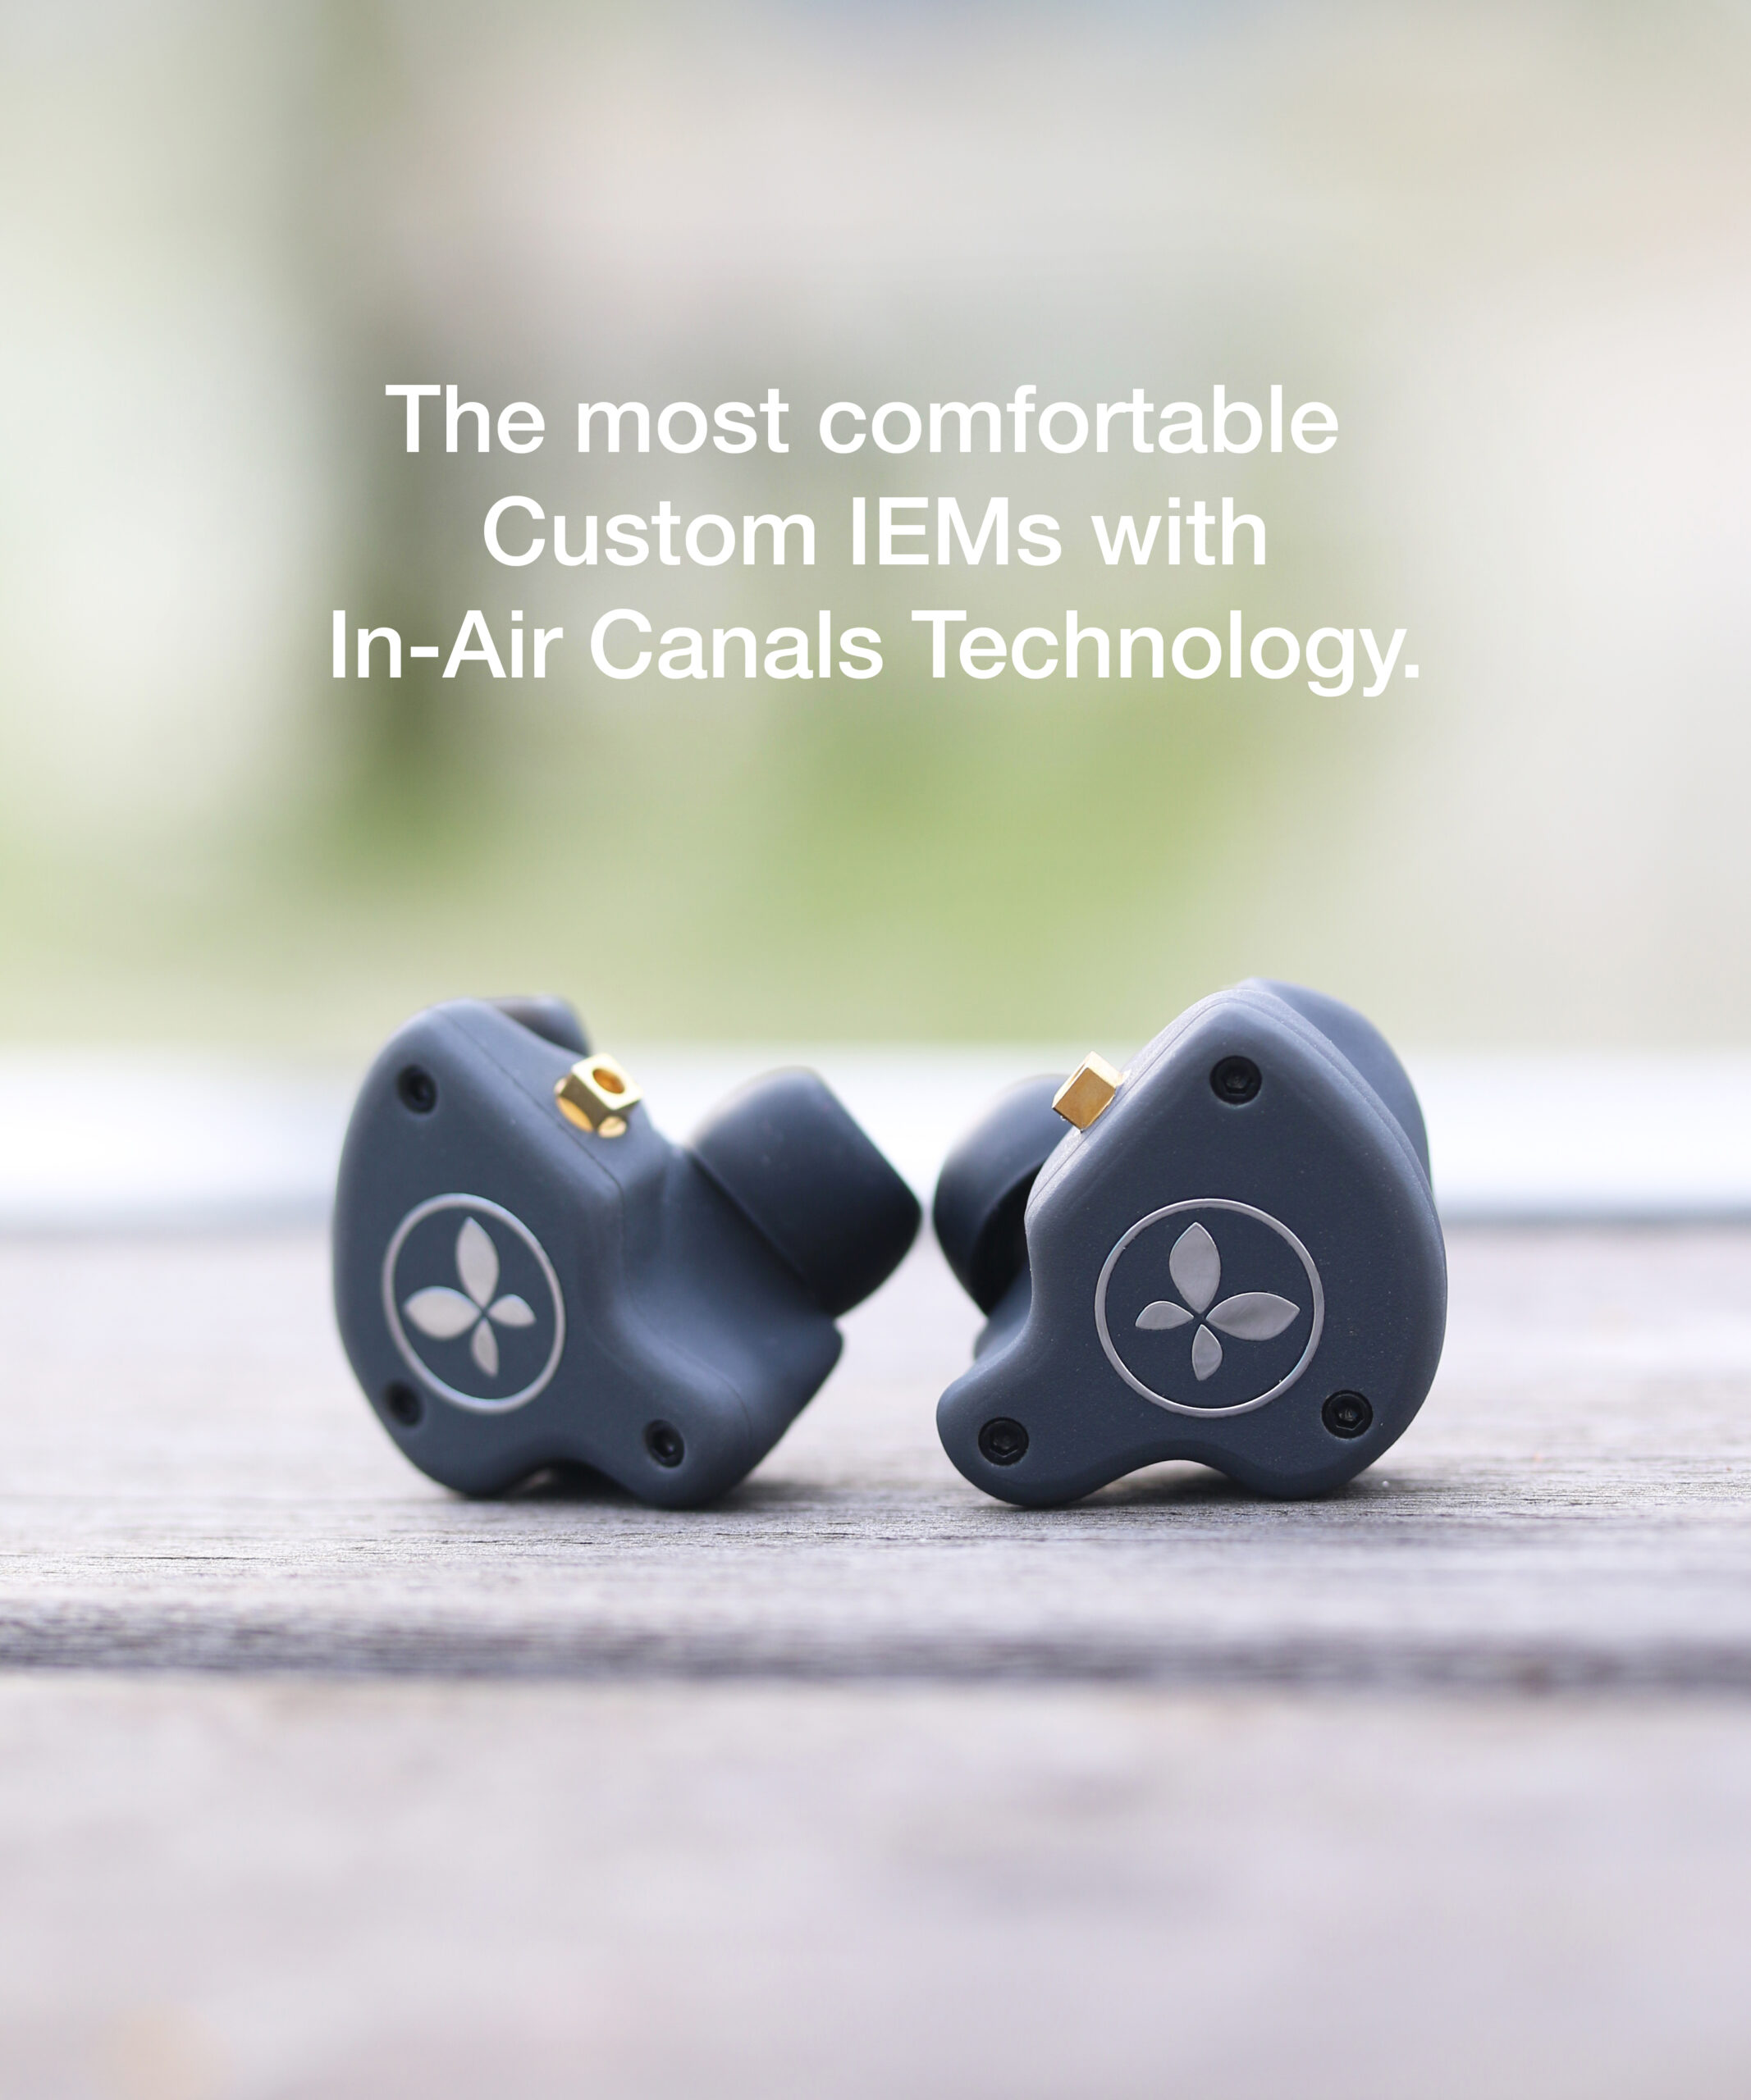 The most comfortable Custom IEMs with In-Air Canals Technology